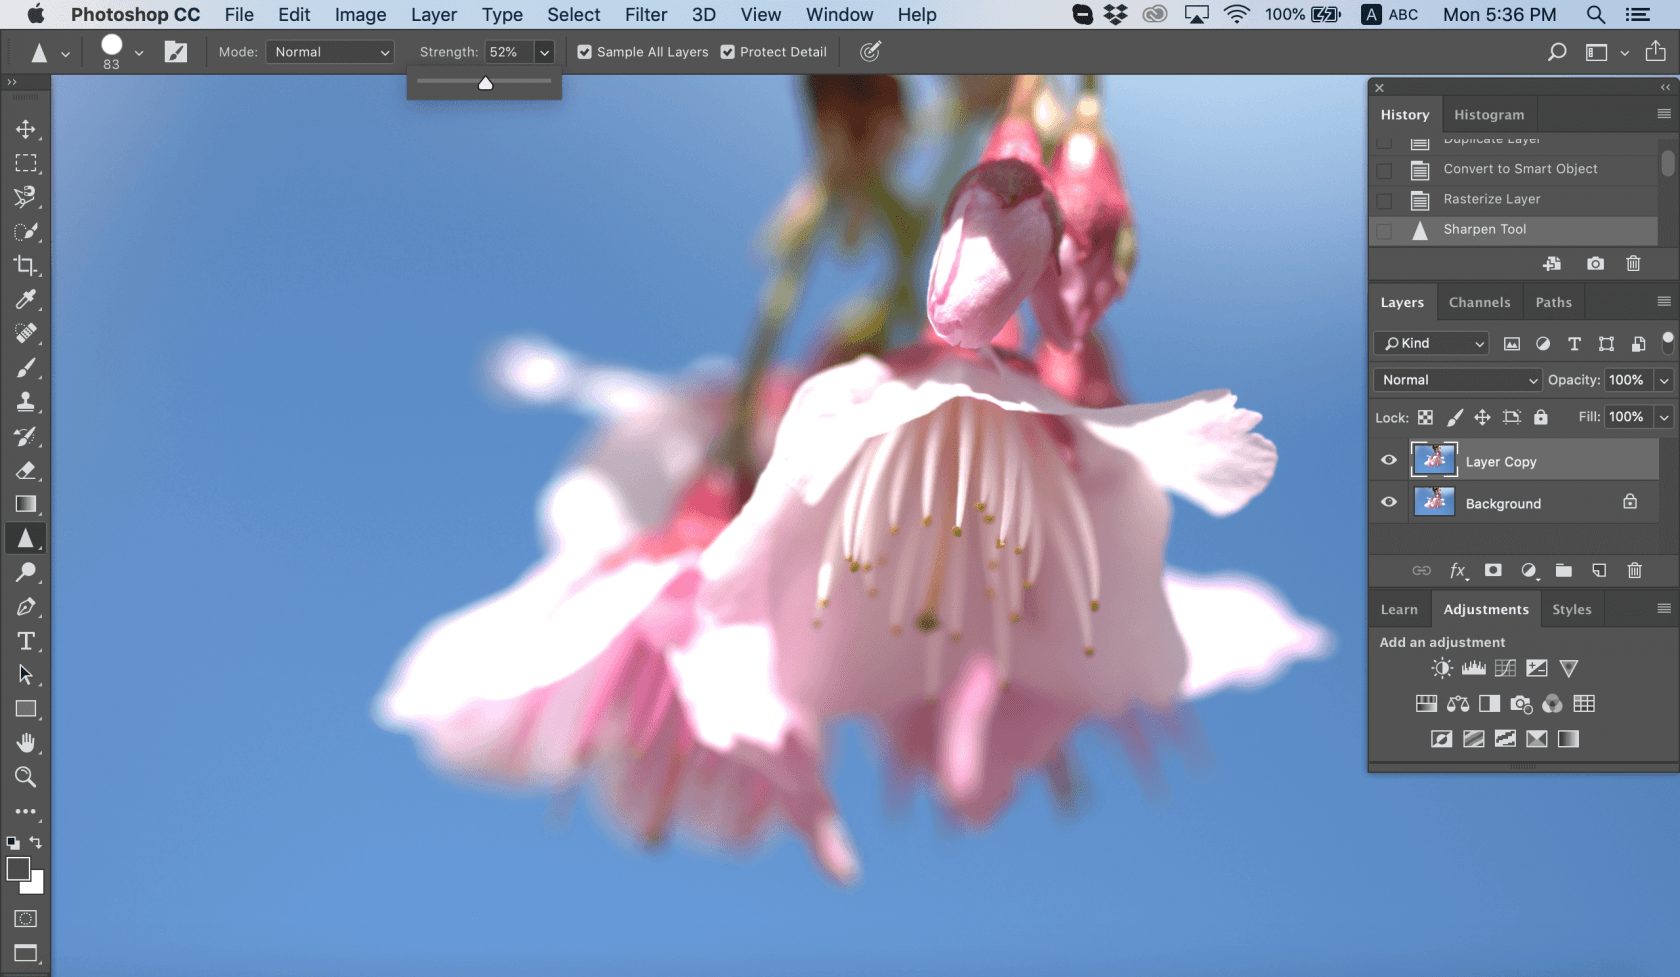 How to Sharpen an Image in Photoshop Image11